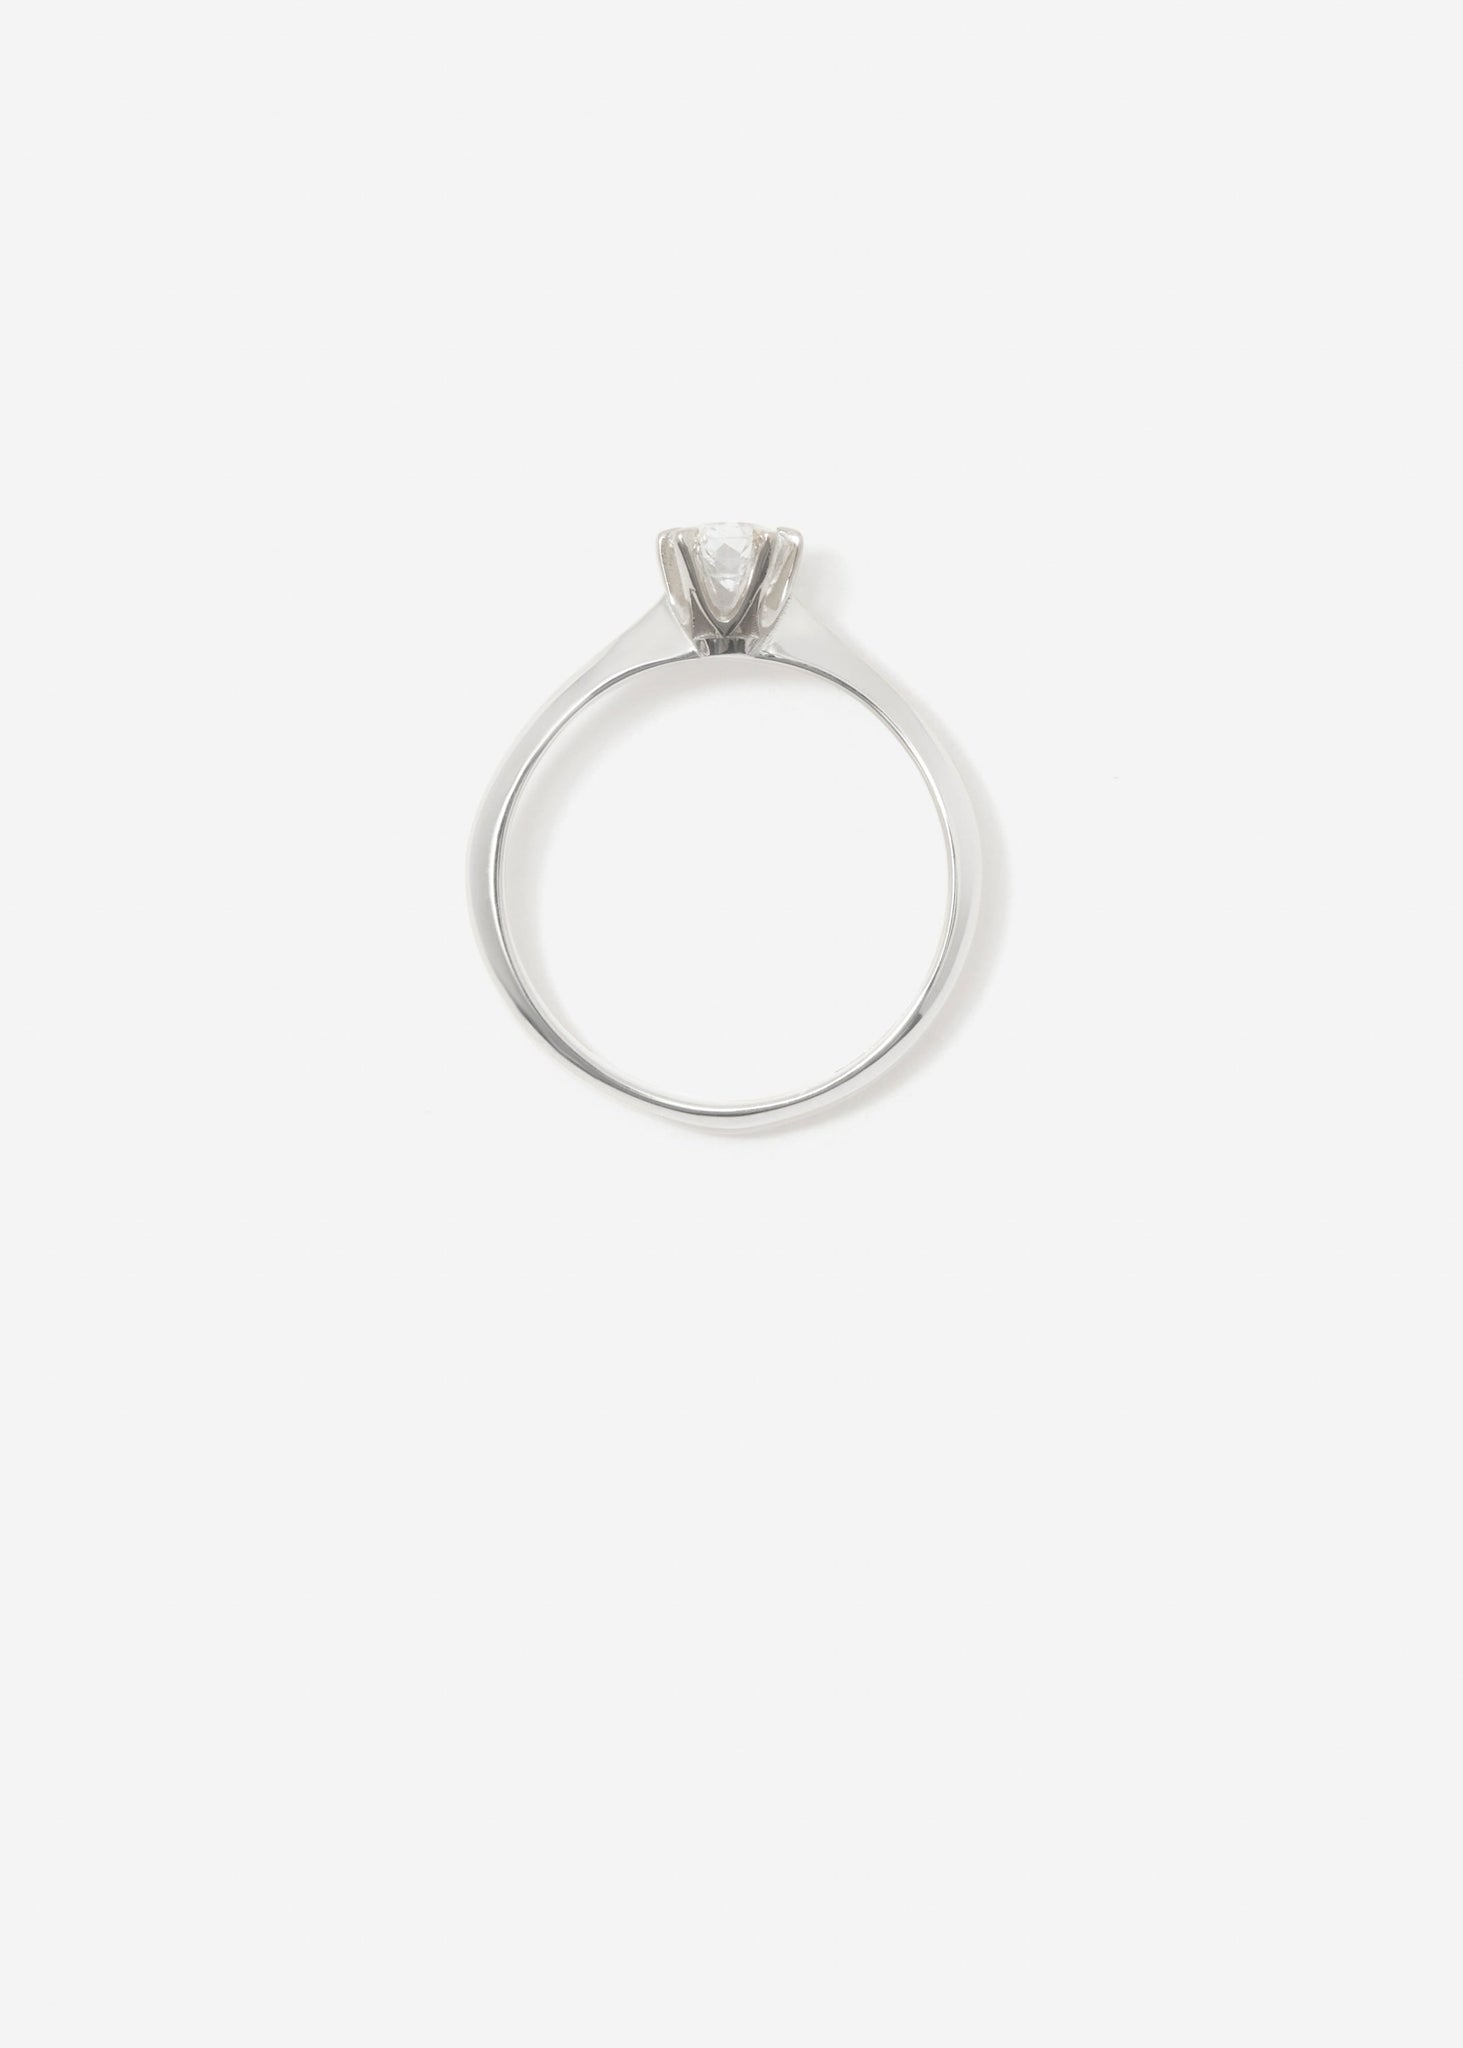 Oval Solitaire Ring Midi 0.3 - 0.5 Ct - Rings - Customised - 2